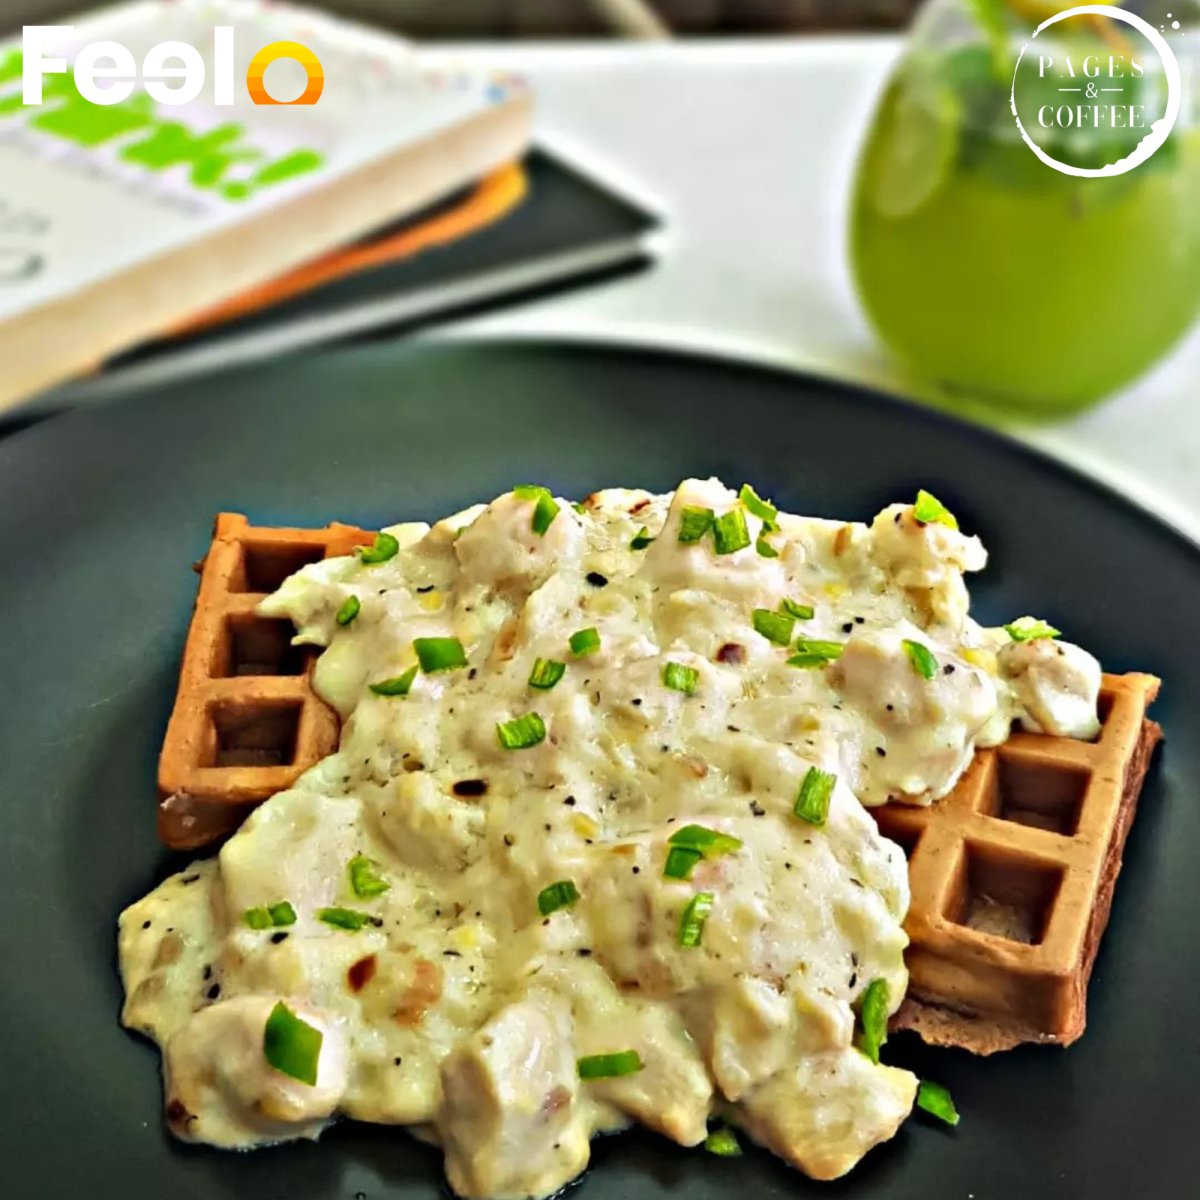 1x Creamy or Spicy Chicken Waffle + 1x Ice Tea of your choice - Pages & Coffee, Colombo - 06 | Feelo